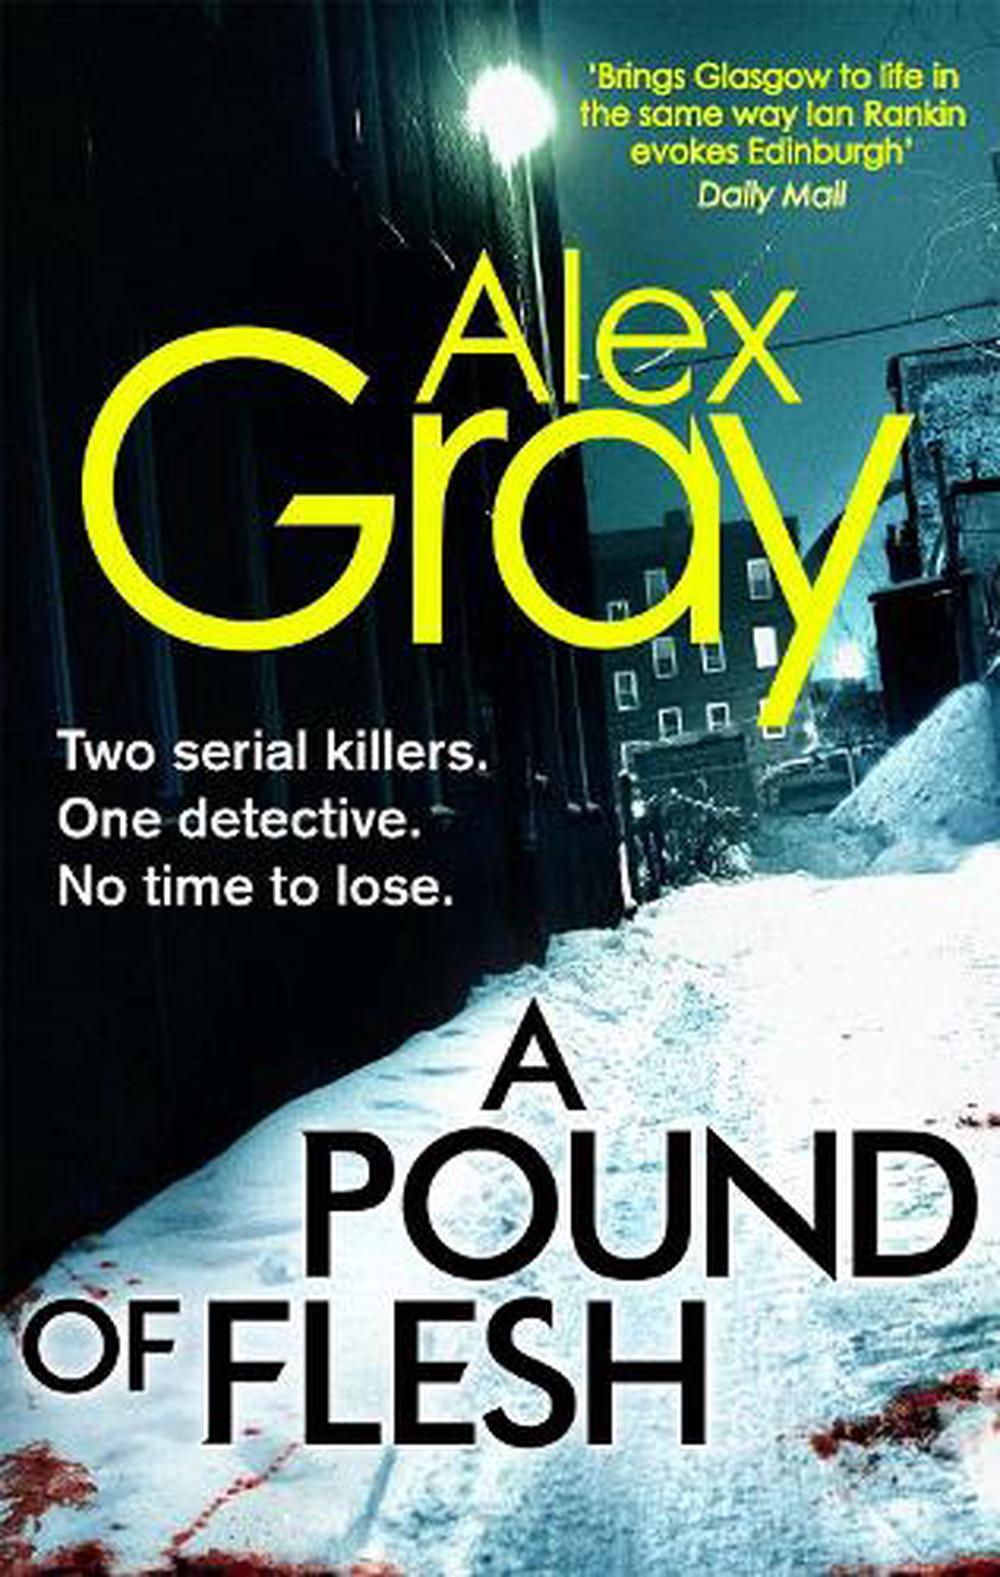 Gray,　9780751543841　by　Nile　Buy　Pound　A　The　online　Flesh　Of　Paperback,　Alex　at